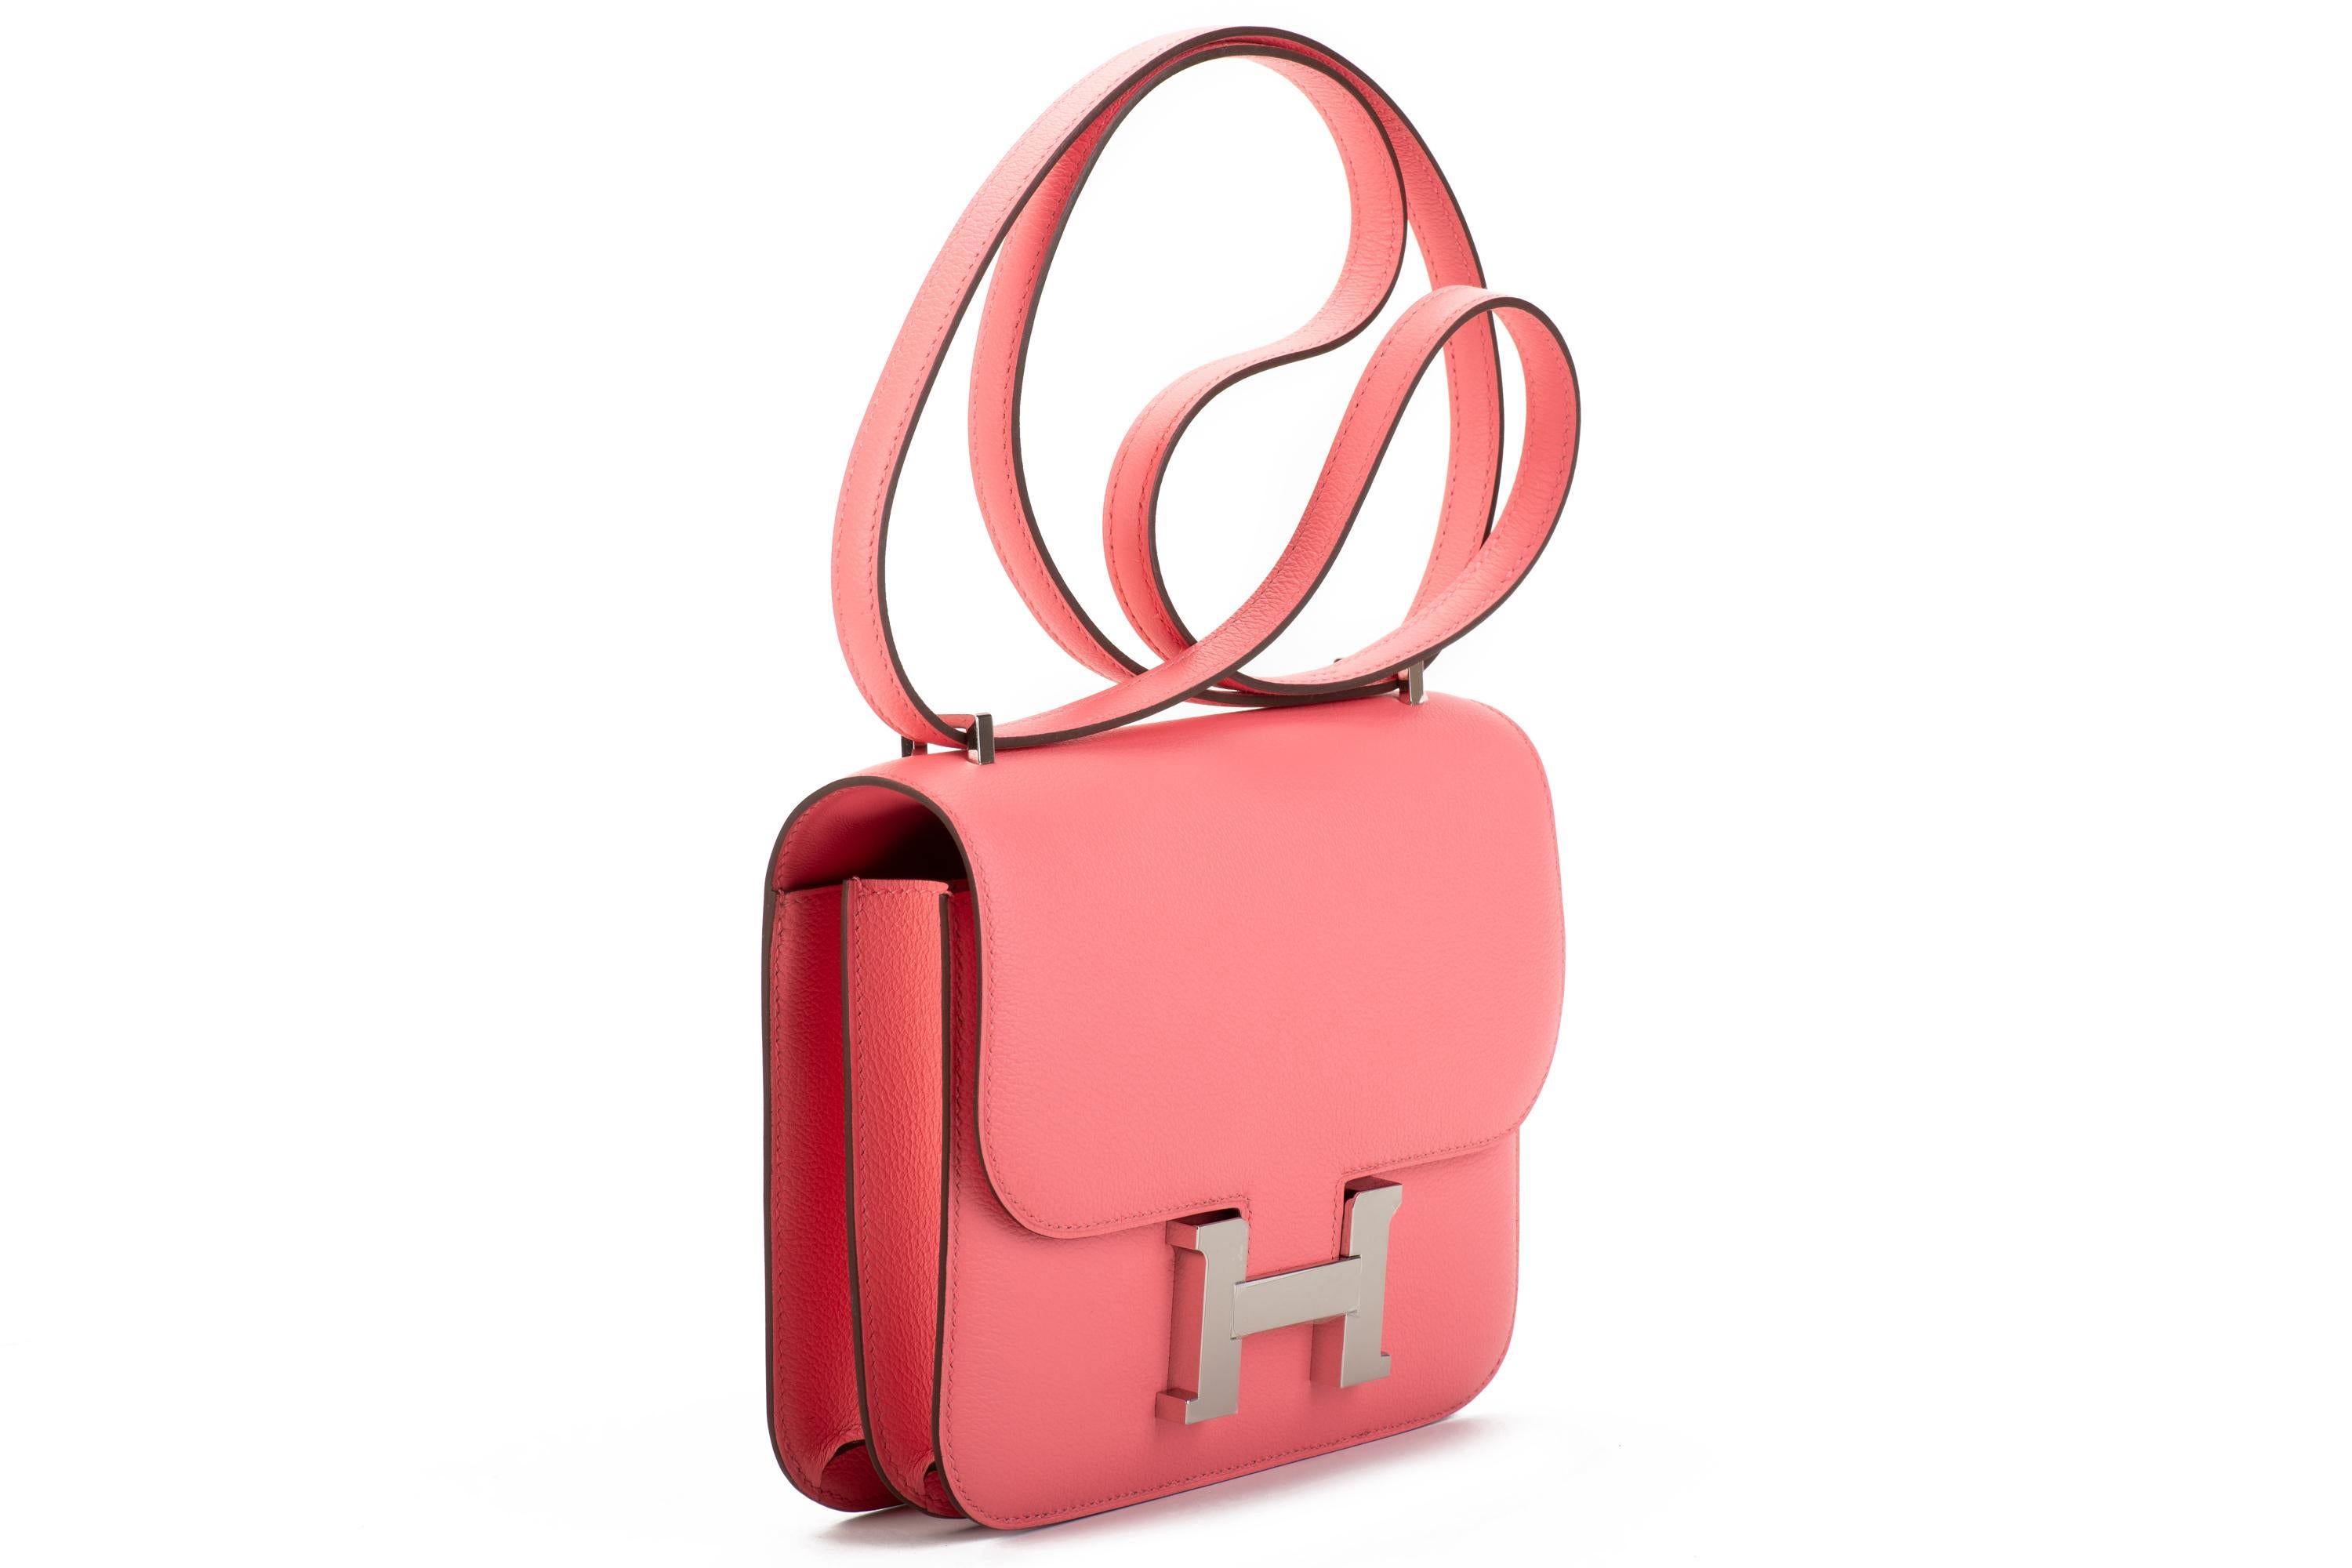 Hermes mini constance cross body 18cm in rose ete' evercolor leather and palladium hardware. Date stamp Y for 2020. Brand new in box with dust cover, booklet, box, ribbon and shopping bag.